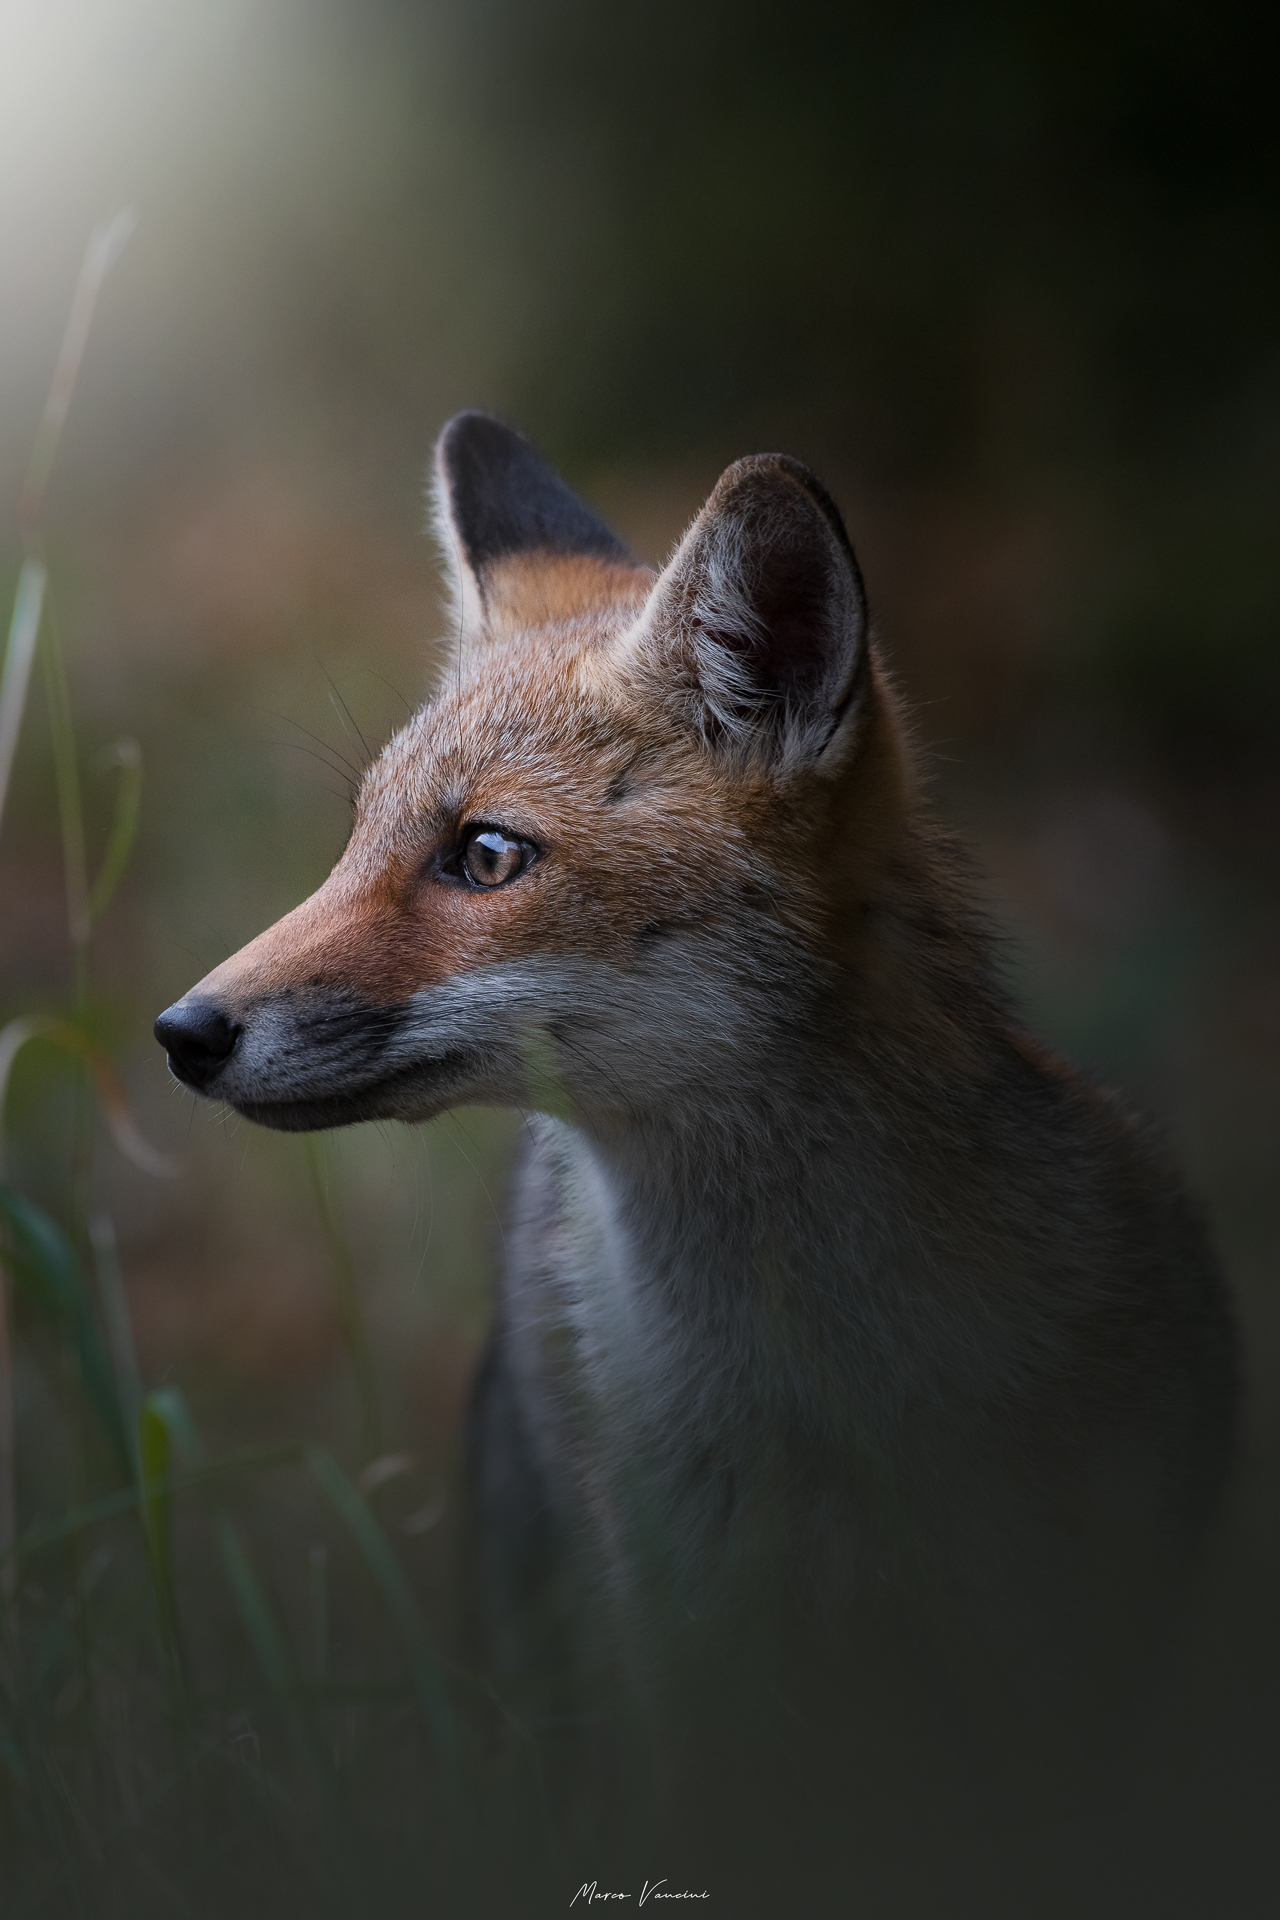 The profile of the red fox ...